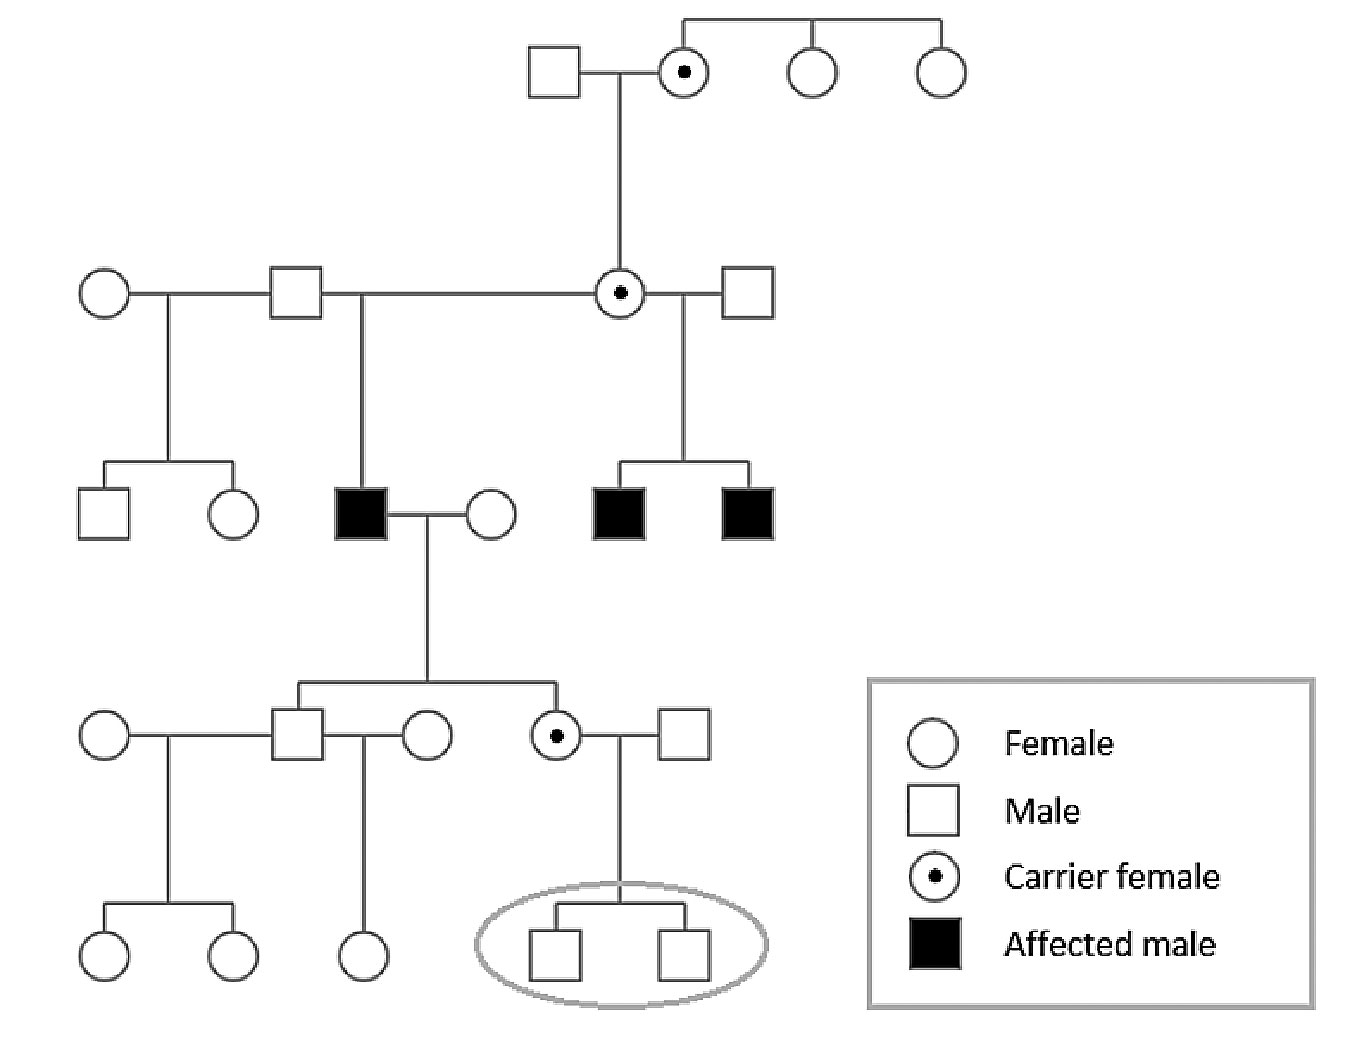 Family pedigree of three brothers diagnosed with choroideremia confirmed with genetic testing. Applying the X-linked recessive inheritance pattern indicates that a daughter of one patient is a carrier for choroideremia; her two young sons each have a 50% probability of having inherited choroideremia.